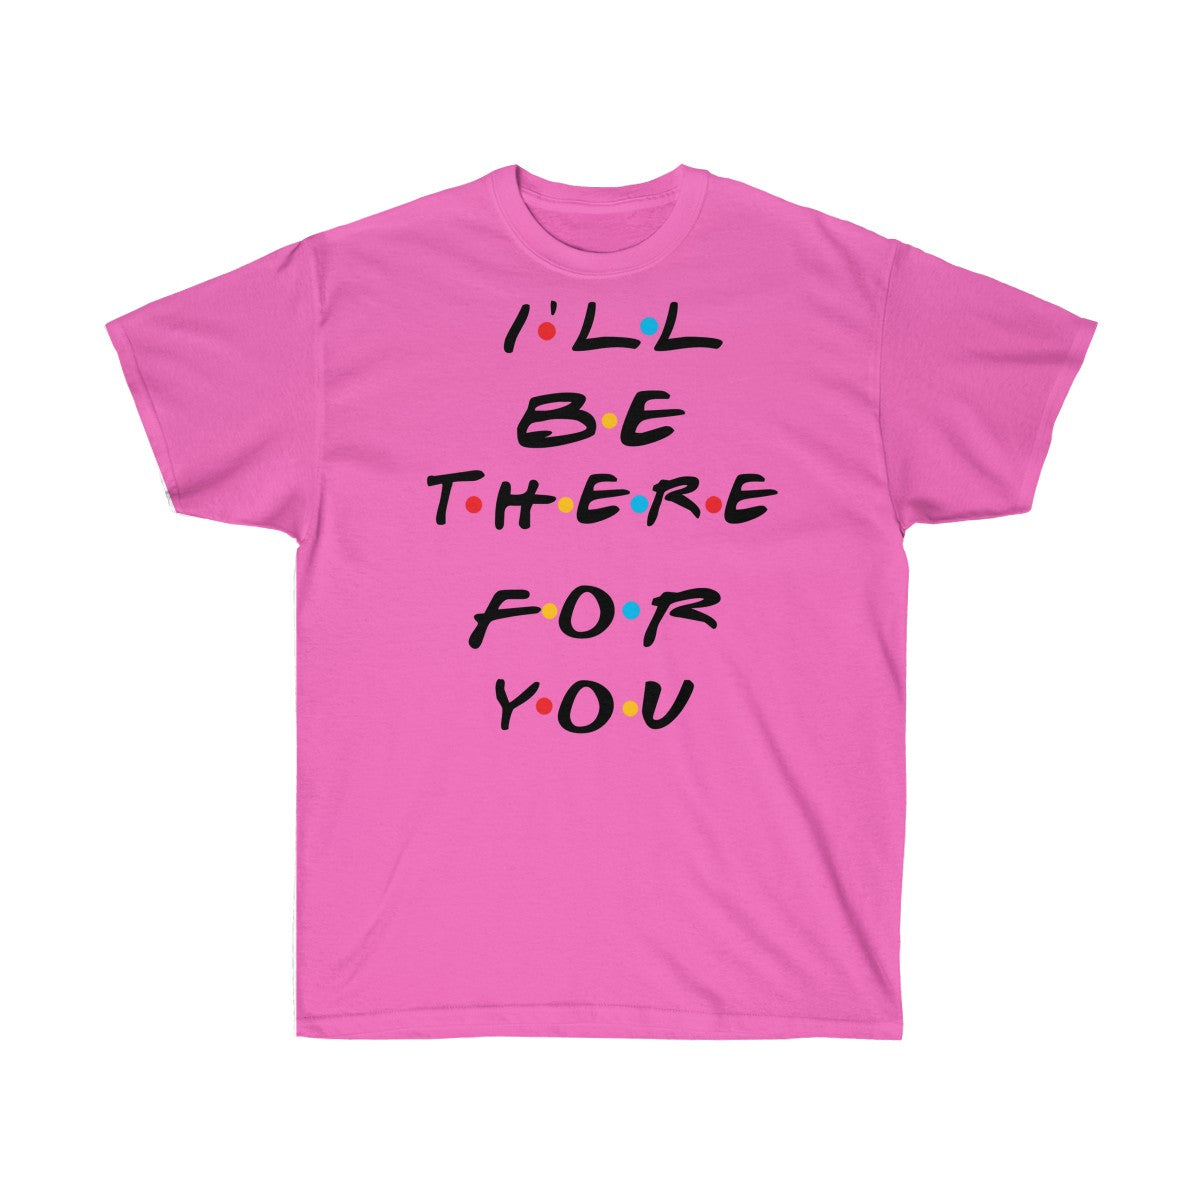 I'll Be There For You - Shirts - Tees - Unisex Cotton T-Shirts